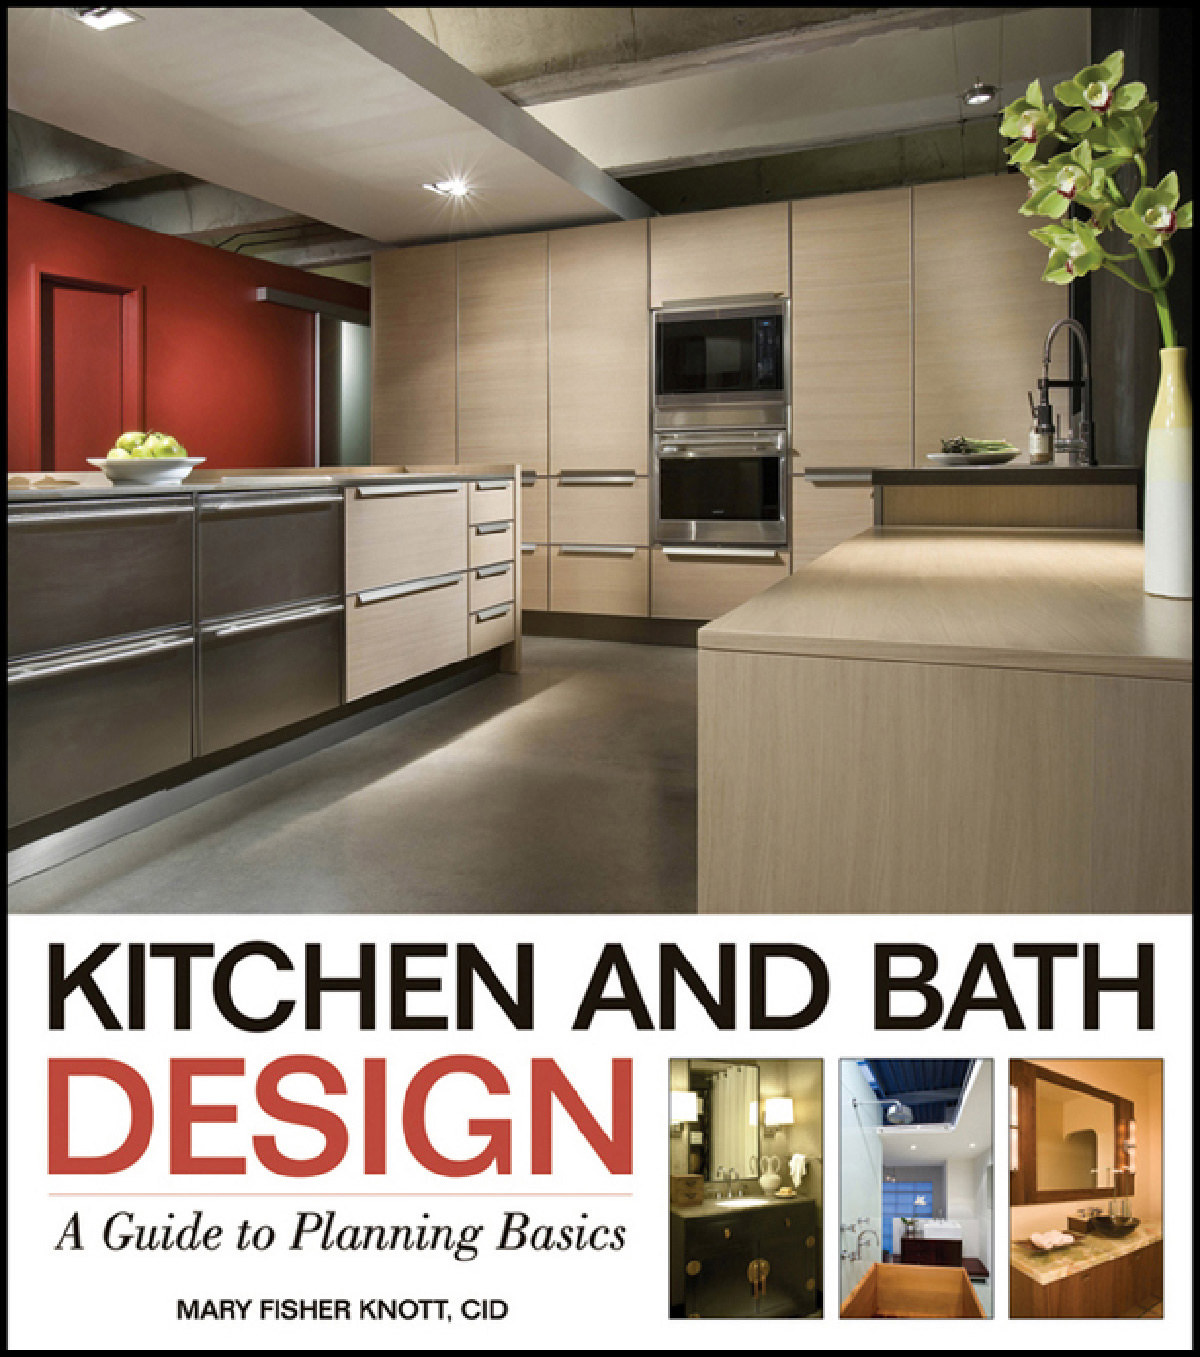 0470392002 Kitchen And Bath Design A Guide To Planning Basics Page 